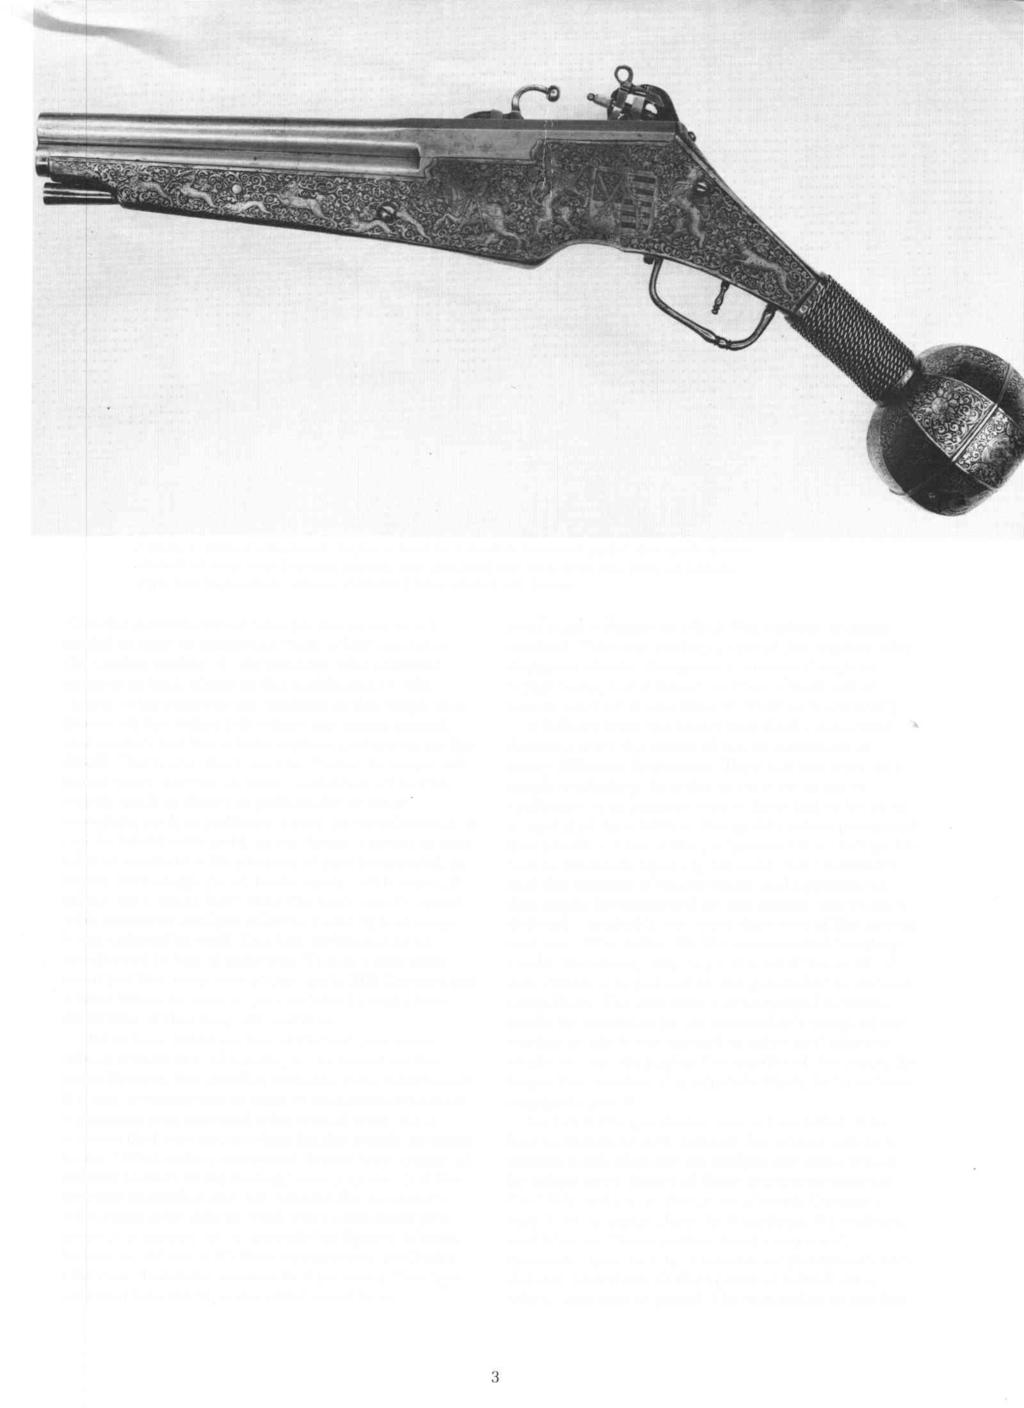 Figure 1. Etched ornament: Saxon wheel lock double barreled pistol, the stock of iron etched all over with hunting scenes and, opposite the lock, with the arms of Saxony with lion supporters.